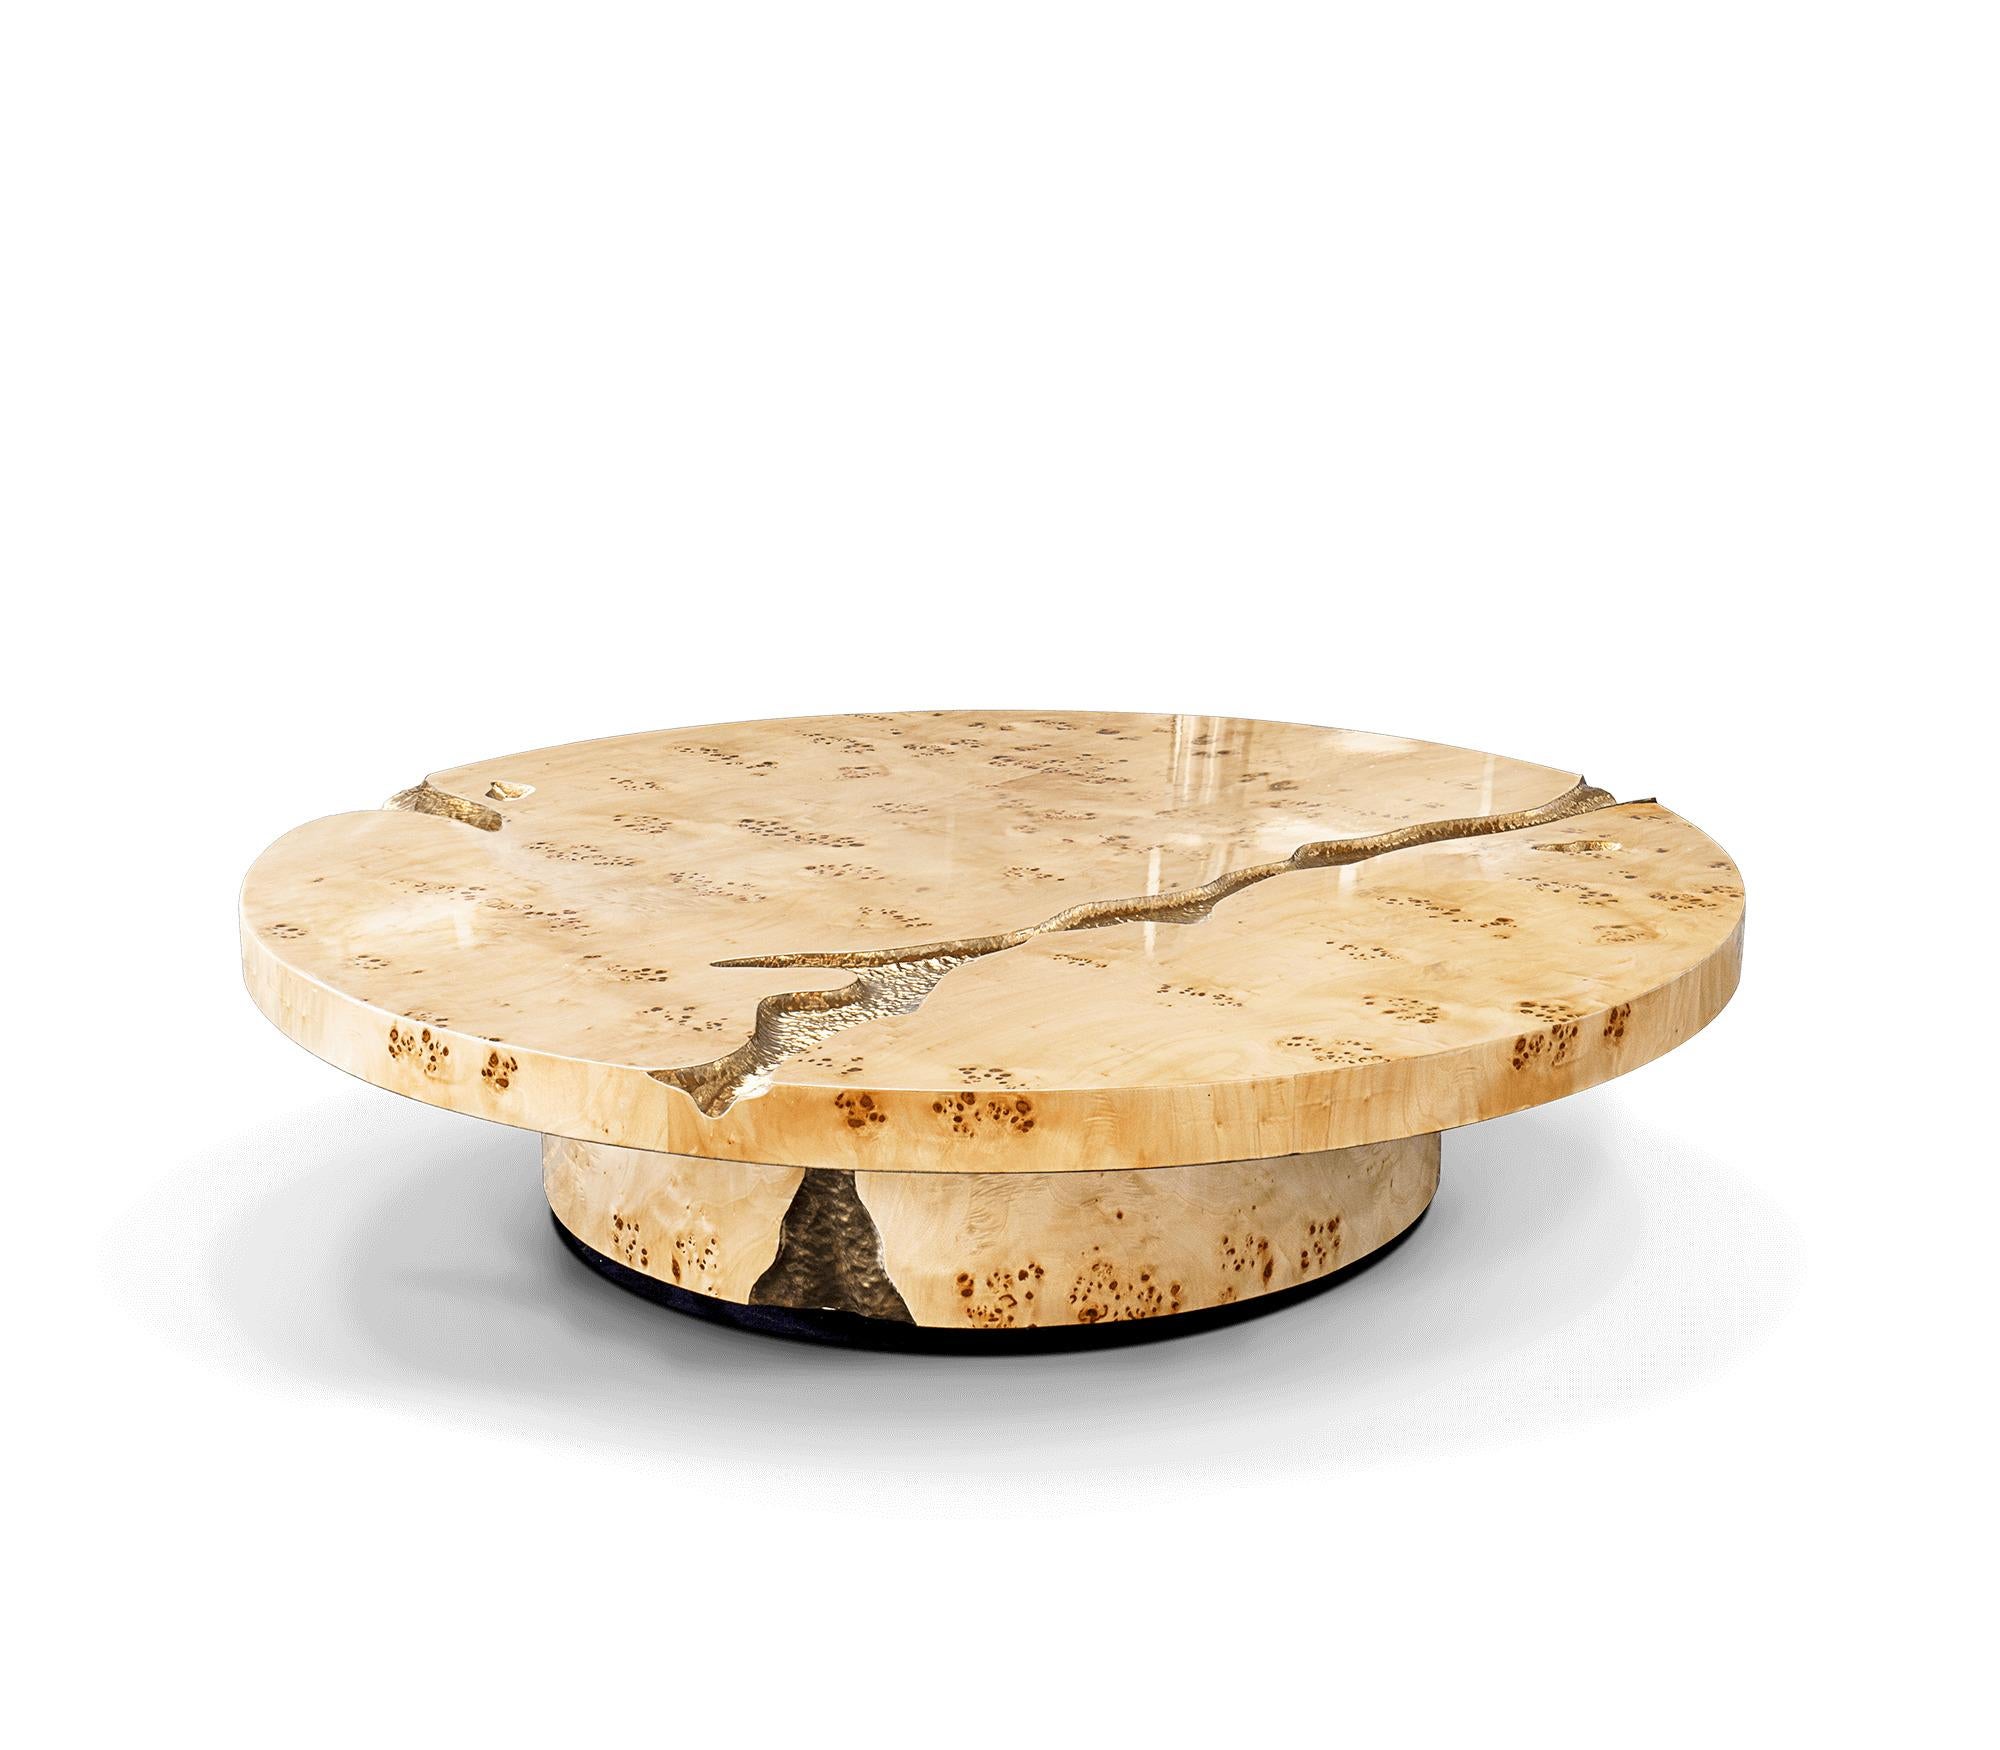 Coffee table in wood and brass

Wood carving and metal works.

Dimensions: H: 37 cm, d: 130 cm

Time of production 12 weeks

Ref: Boca Empire.